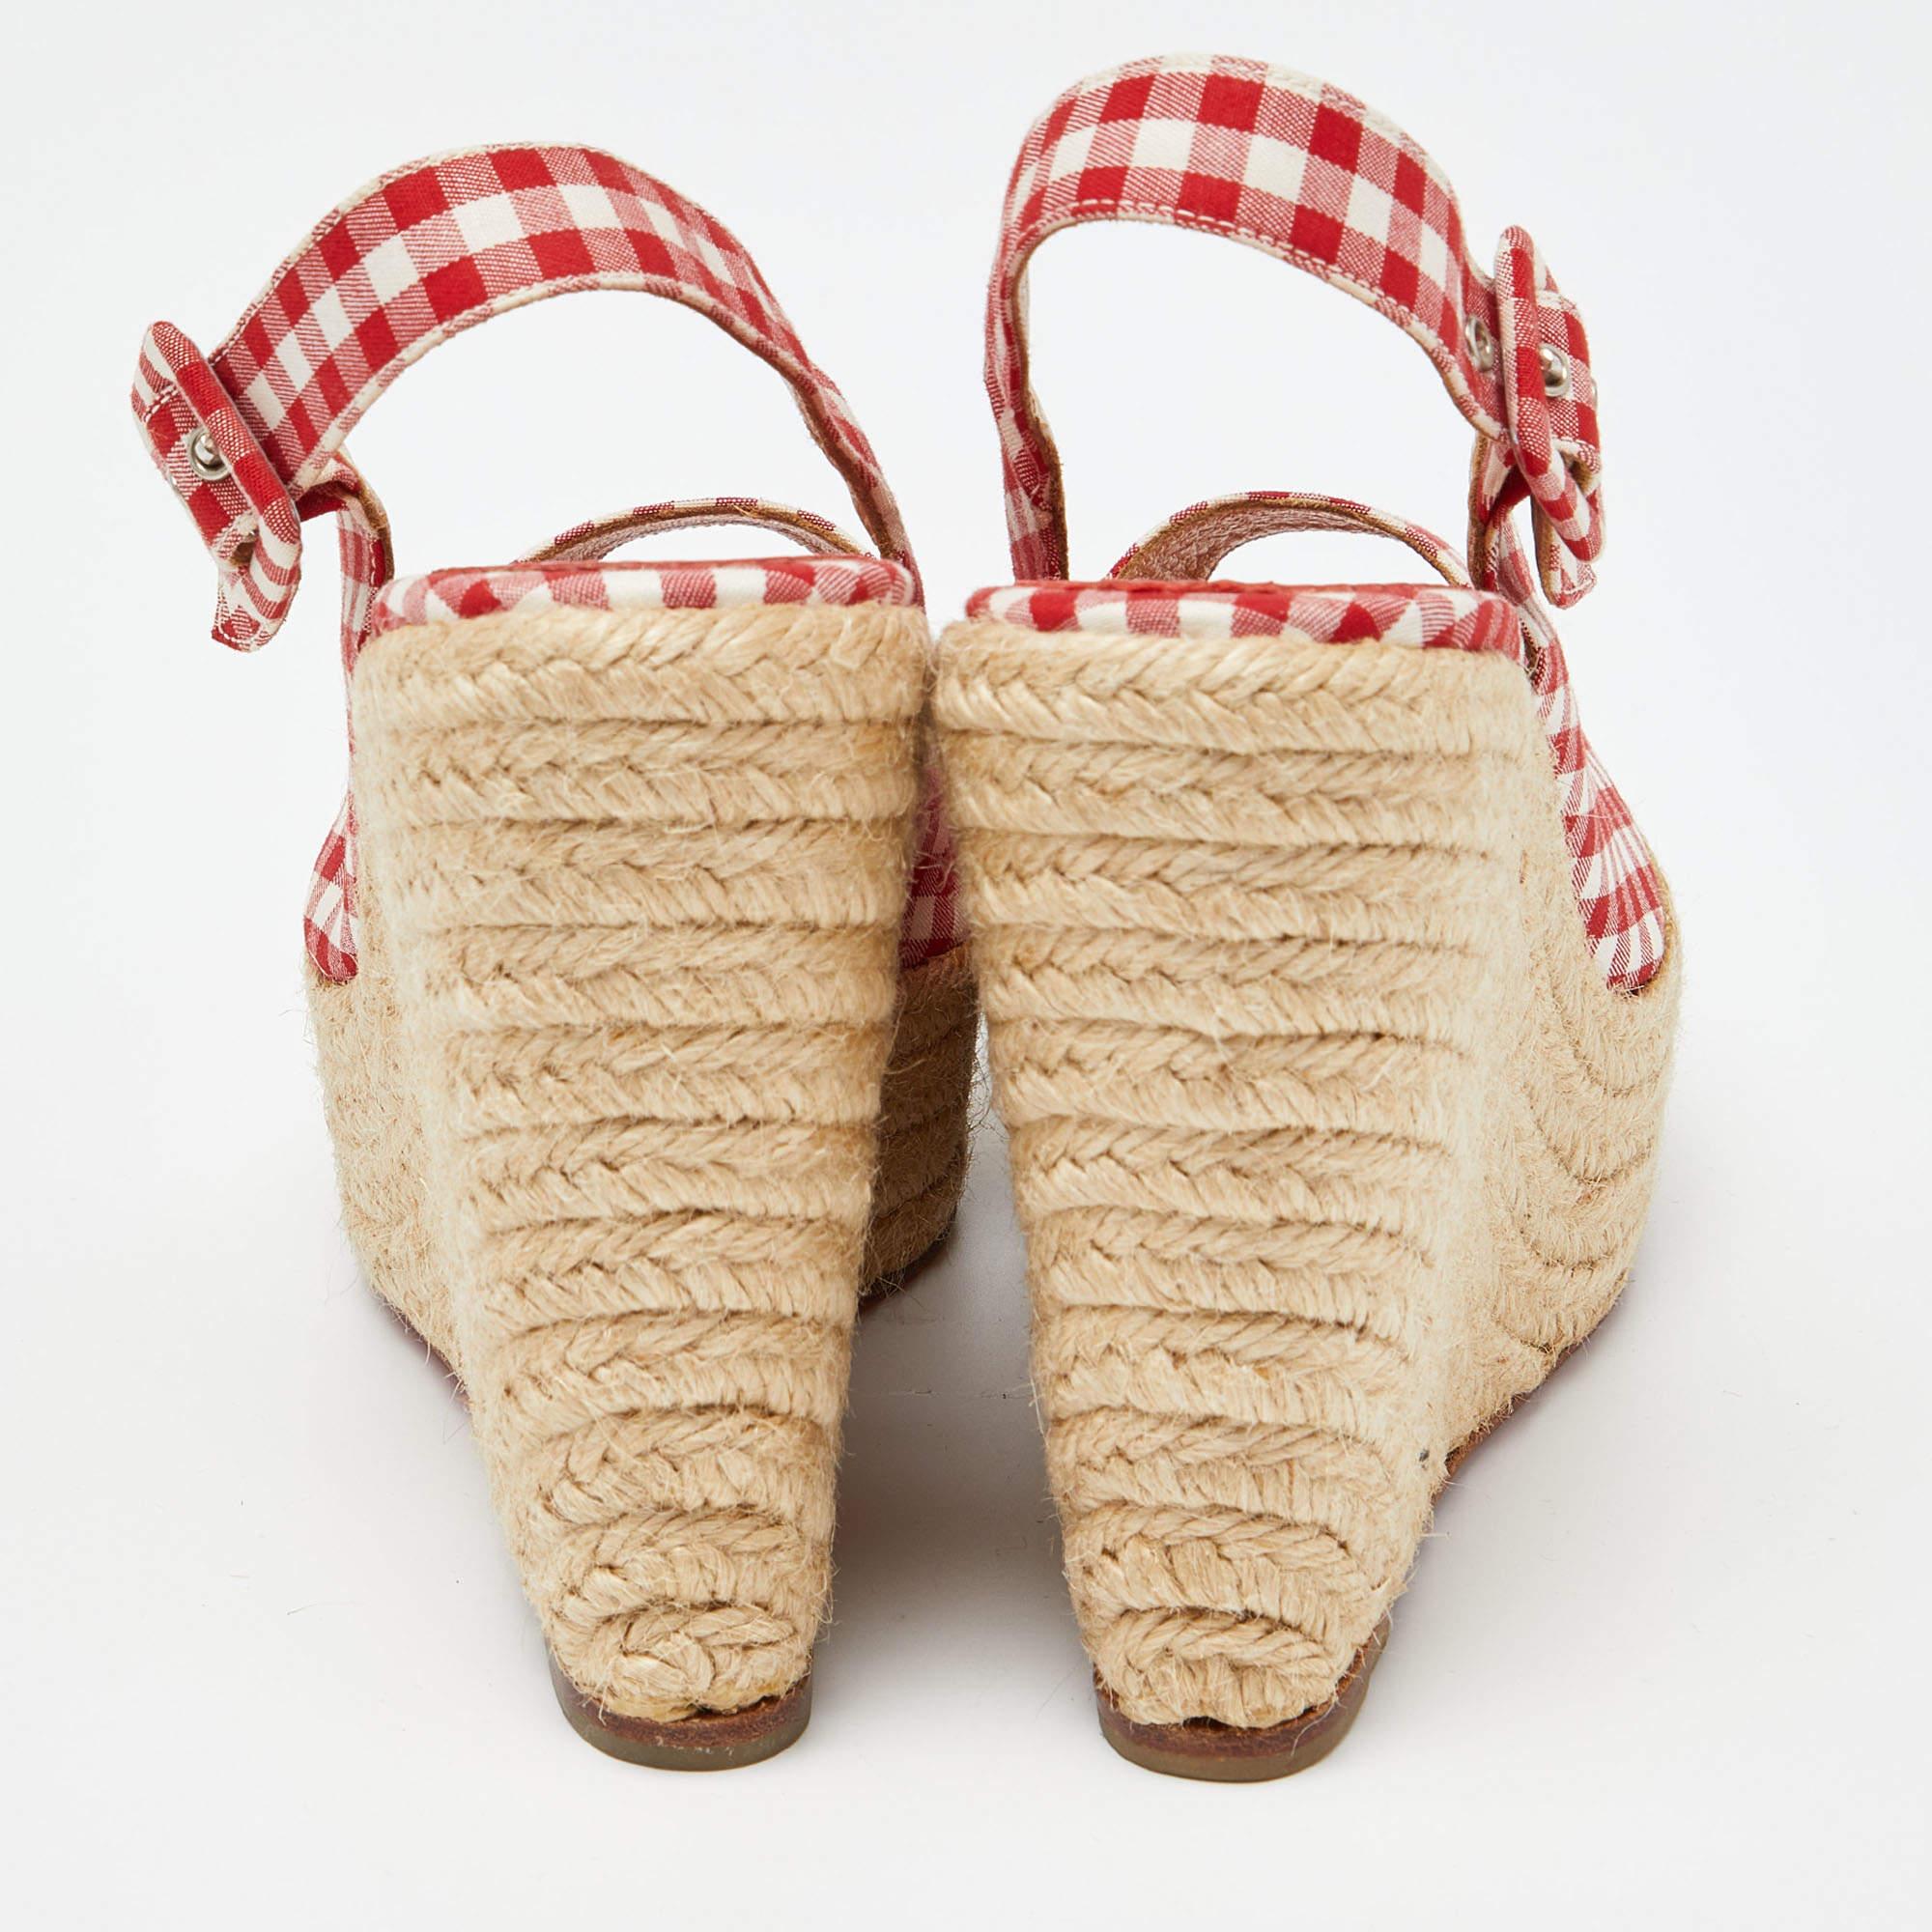 Christian Louboutin Red/White Gingham Fabric Menorca Espadrille Wedge Size 37 For Sale 2